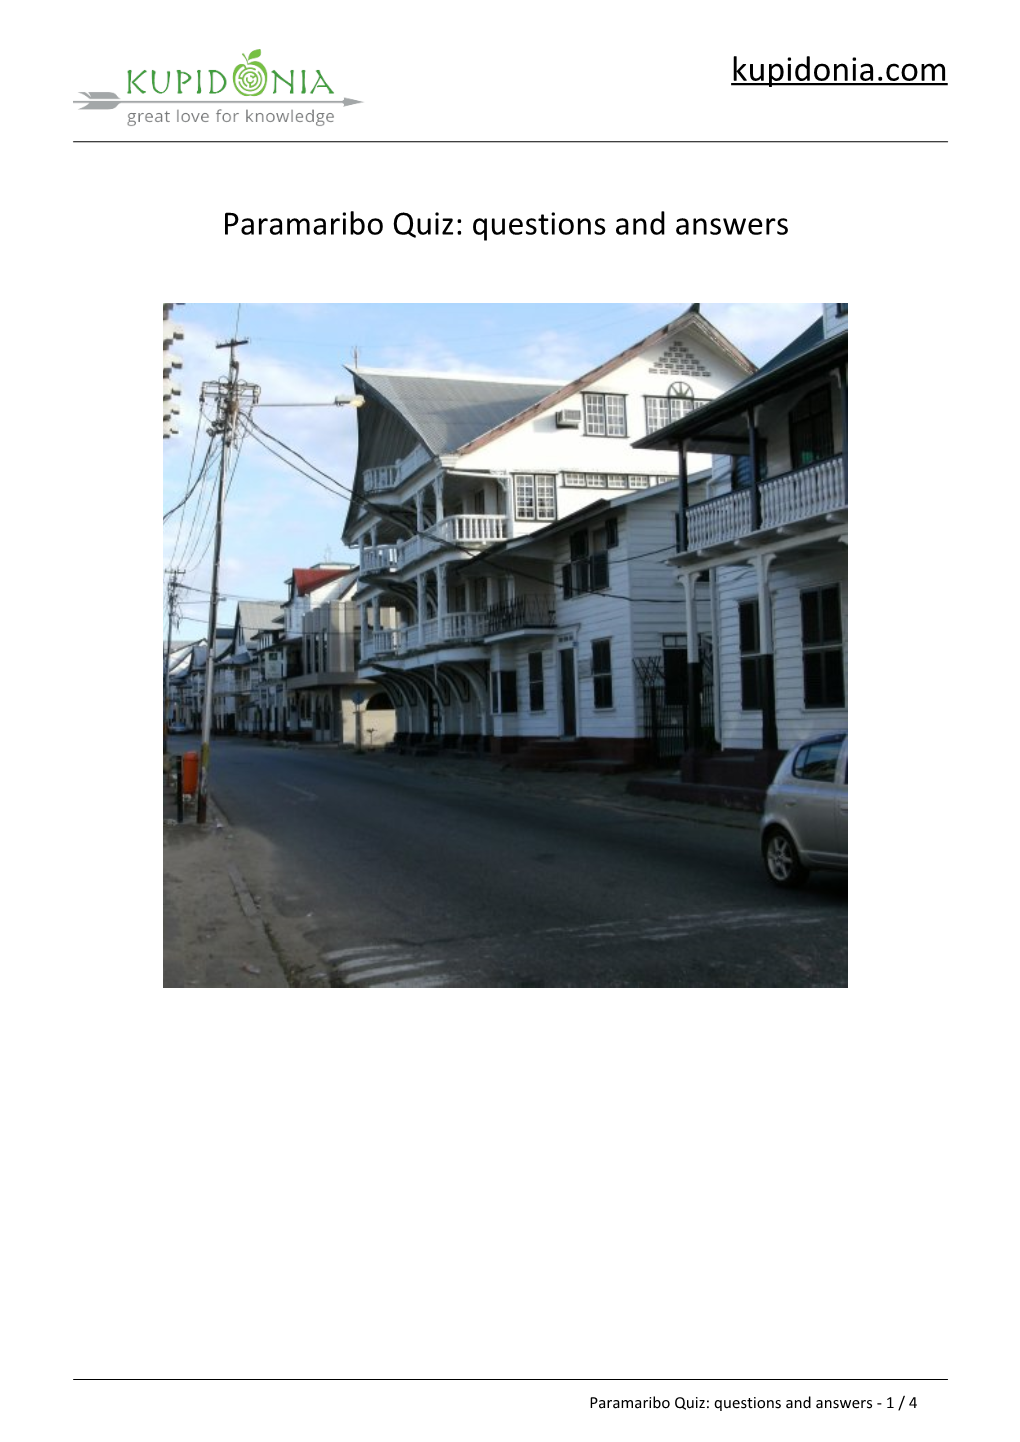 Paramaribo Quiz: Questions and Answers